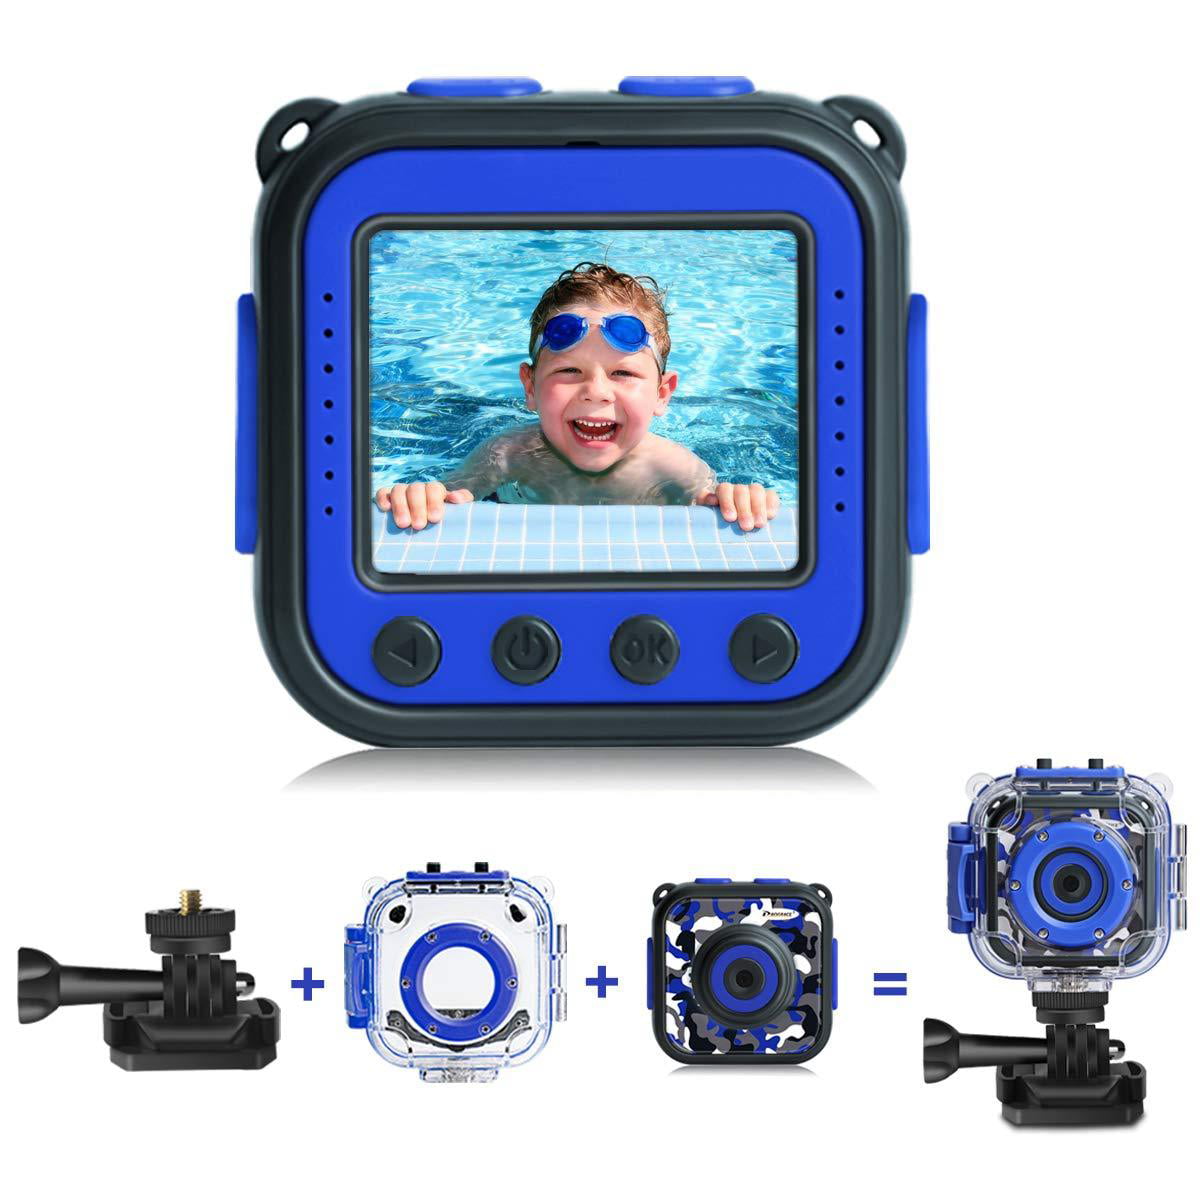 PROGRACE [Upgraded] Kids Waterproof Camera Action Video Digital Camera 1080 HD Camcorder for Boys Toys Gifts Build-in Game(Blue) Blue